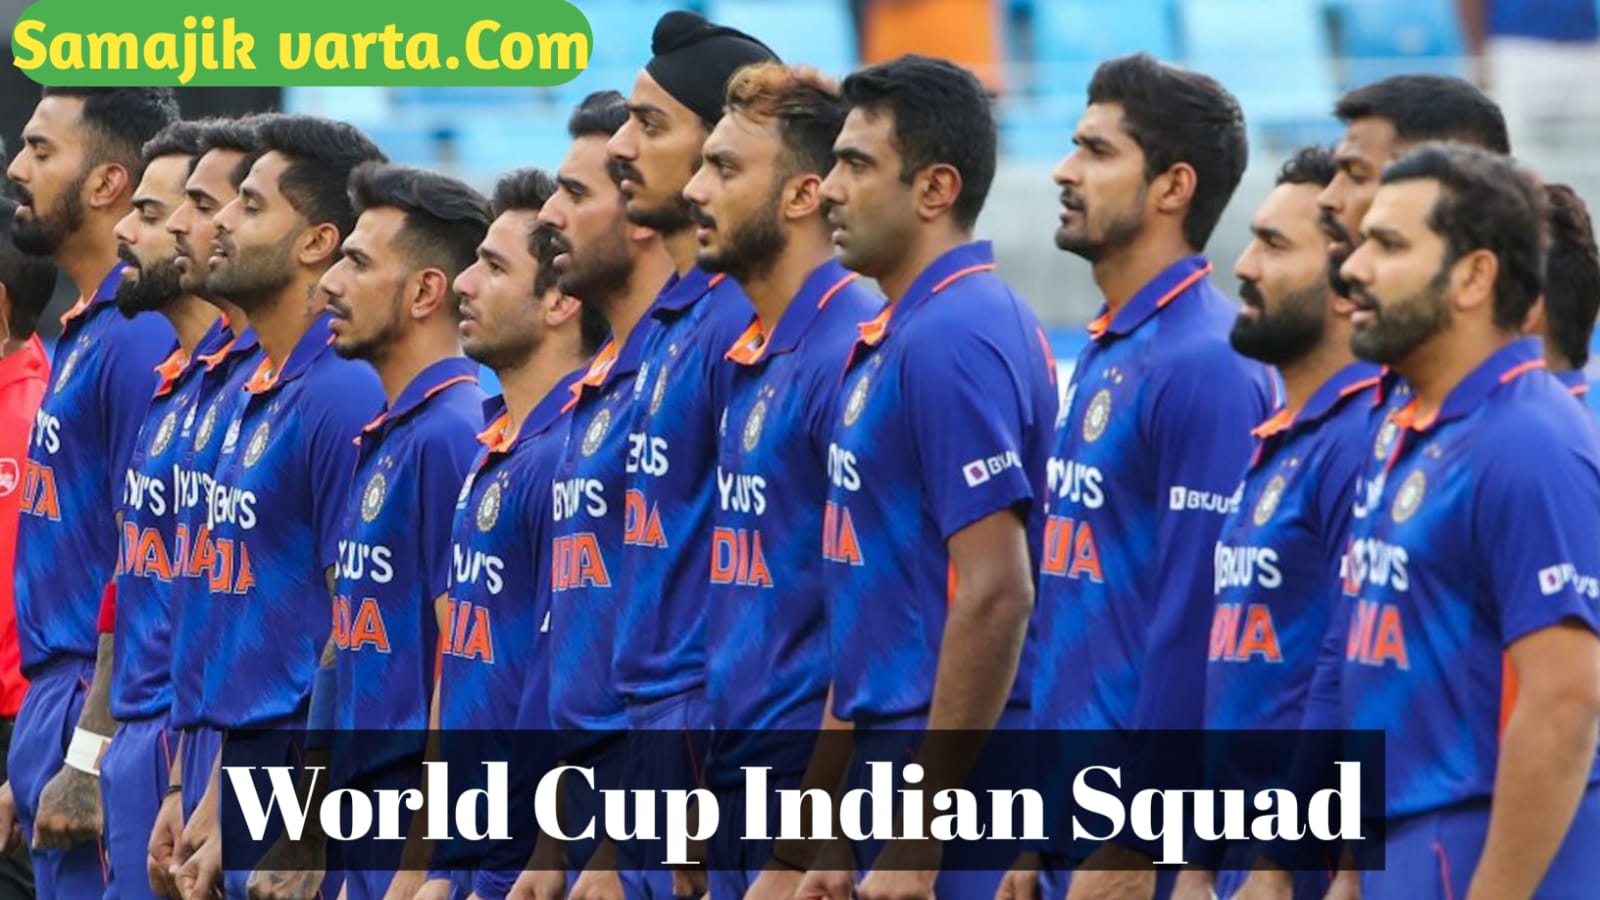 World Cup 2023 India Squad